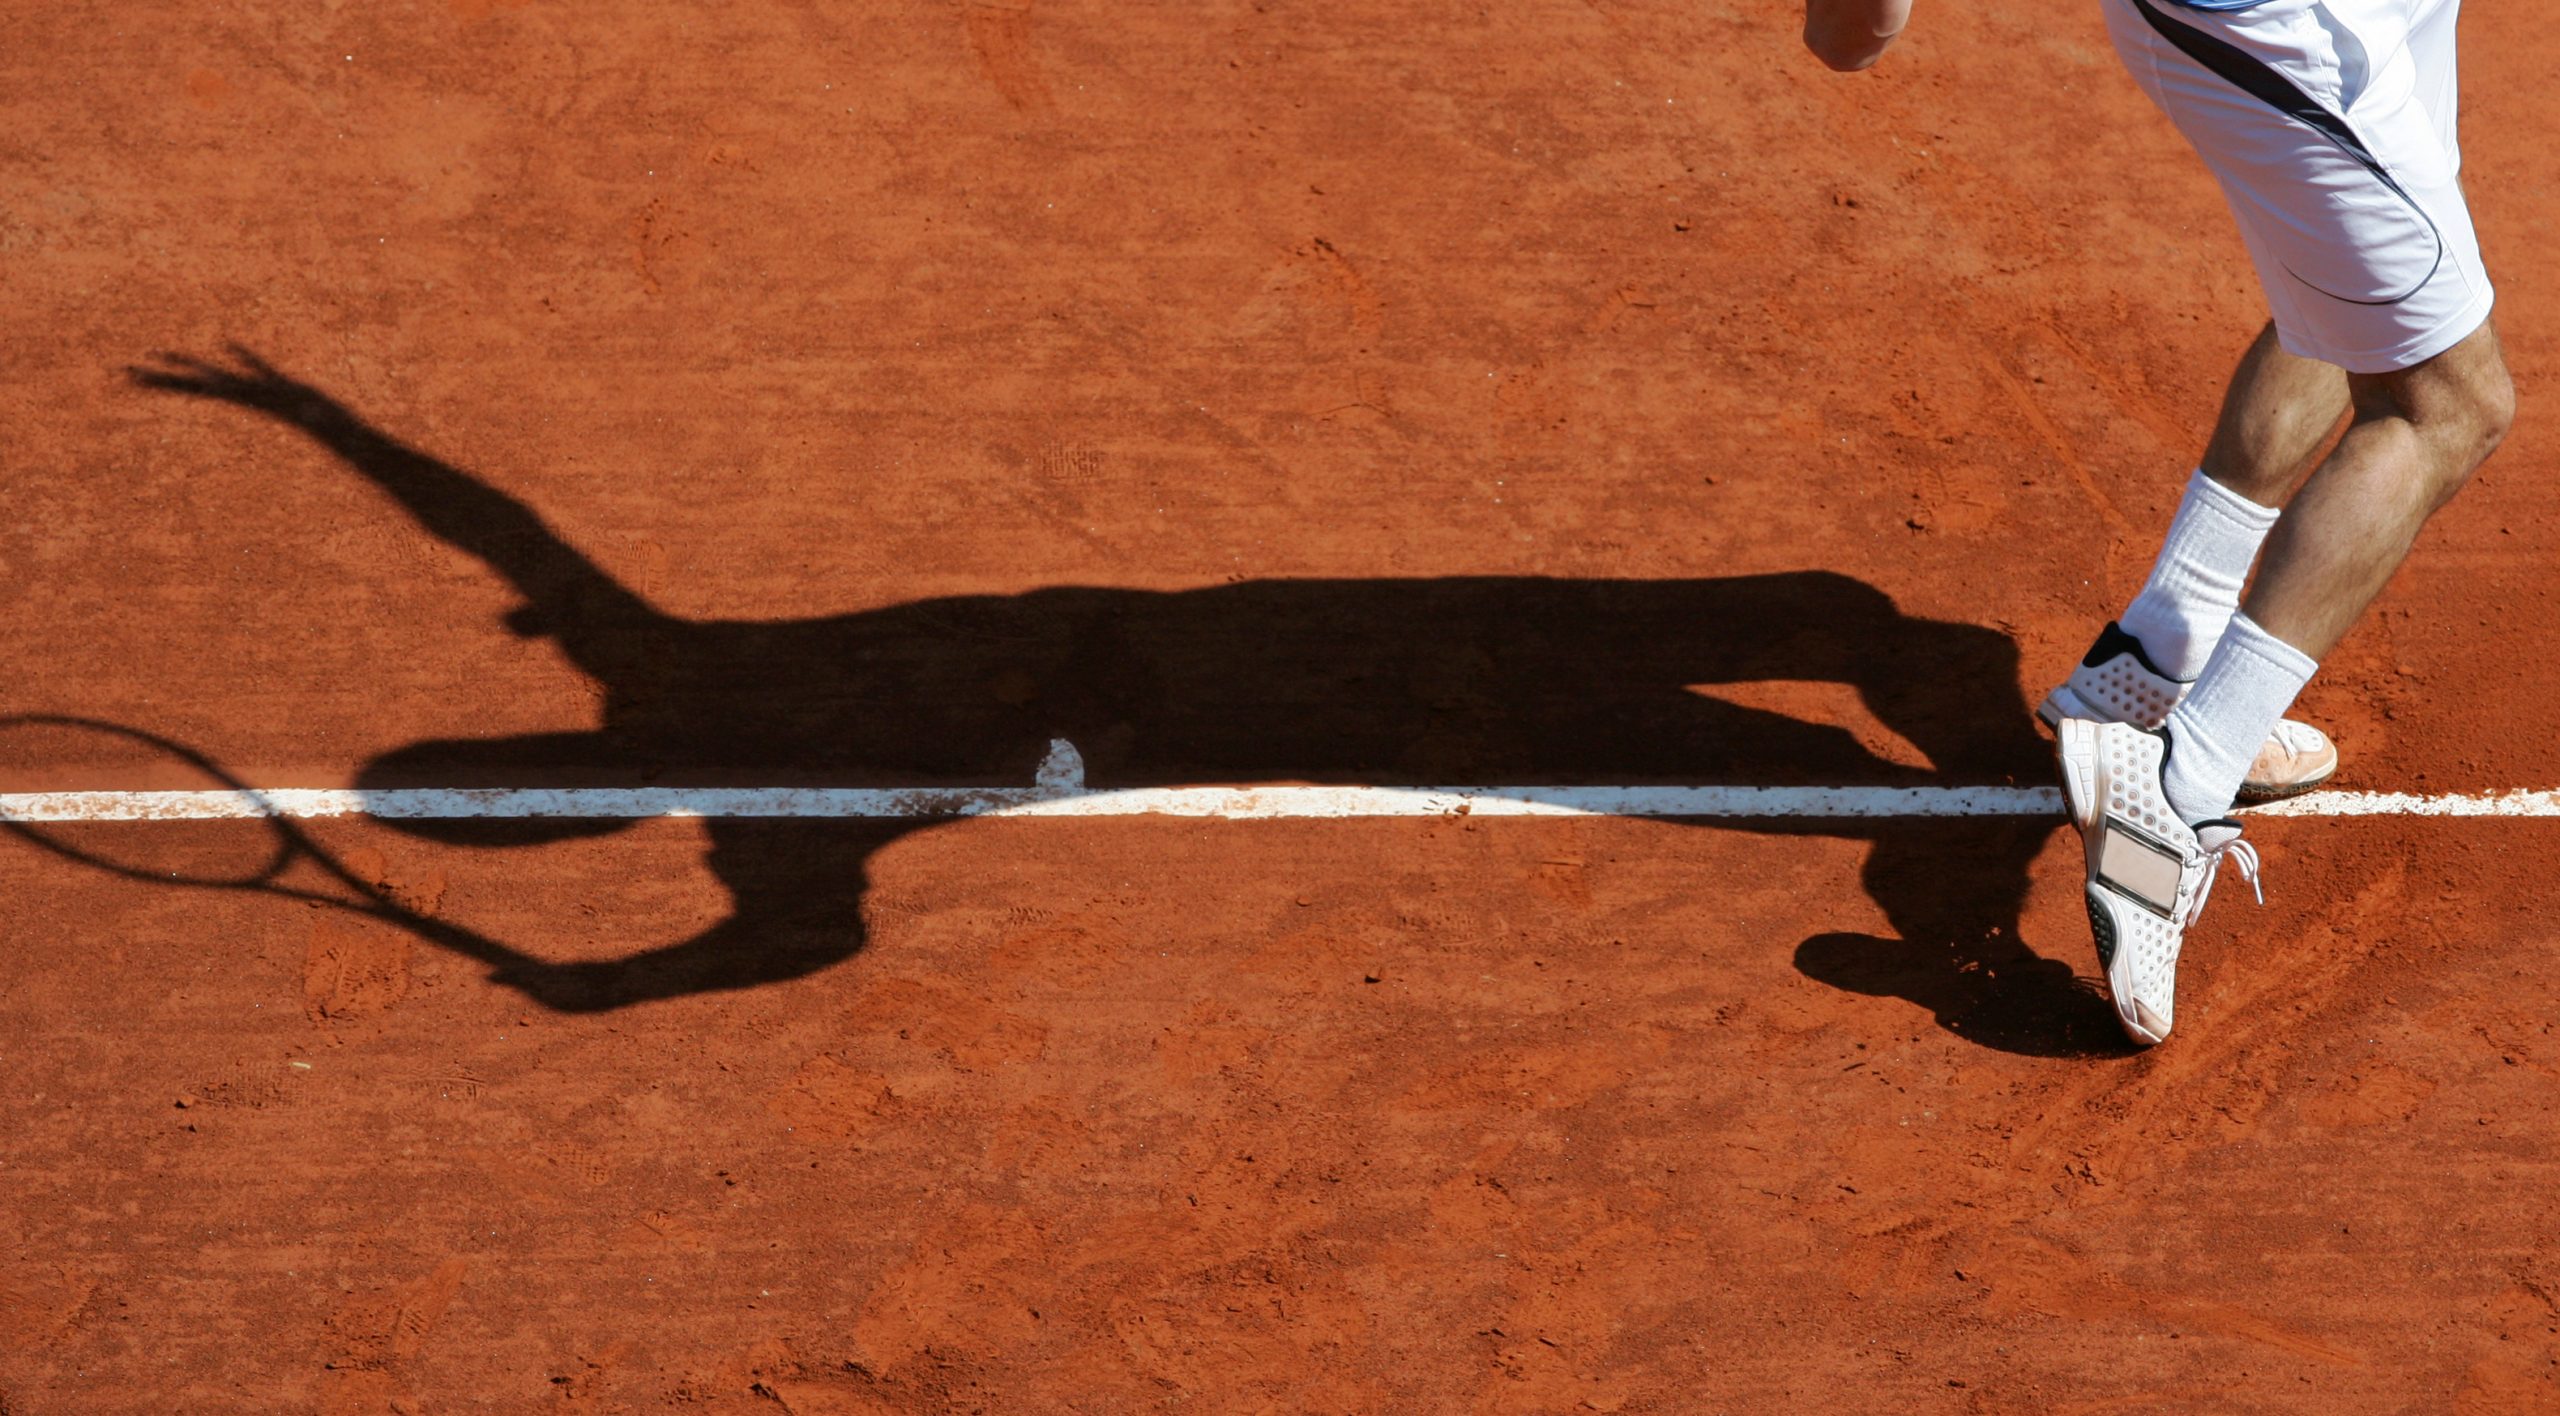 The shadow of a man playing tennis on a court.